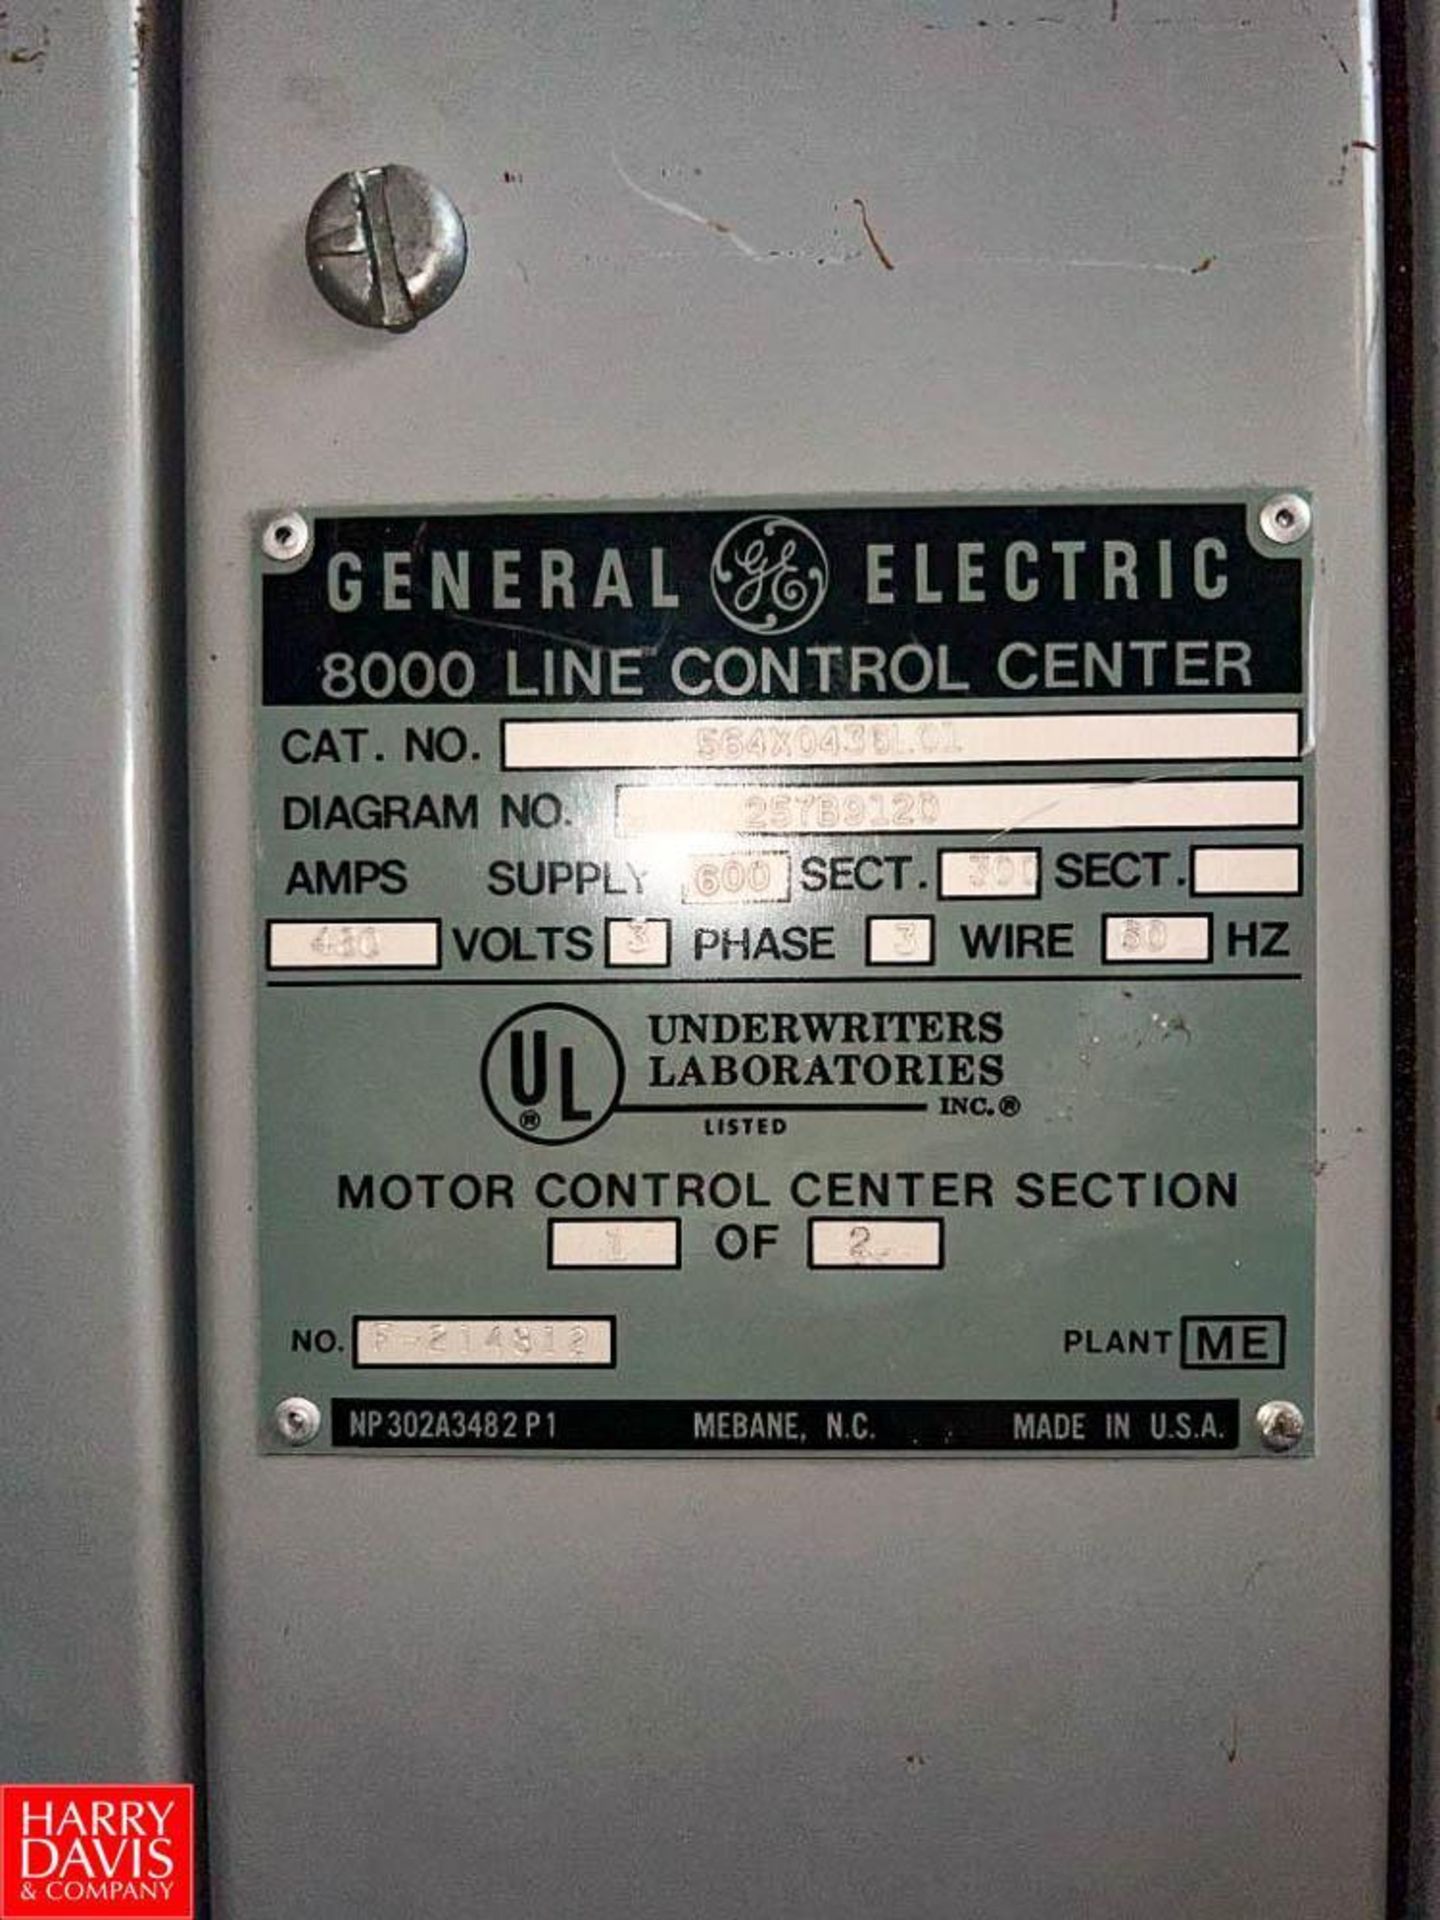 General Electric 8000 Line Control Center with (27) Disconnects, 600 Supply Amps and 300 Section Amp - Image 3 of 6